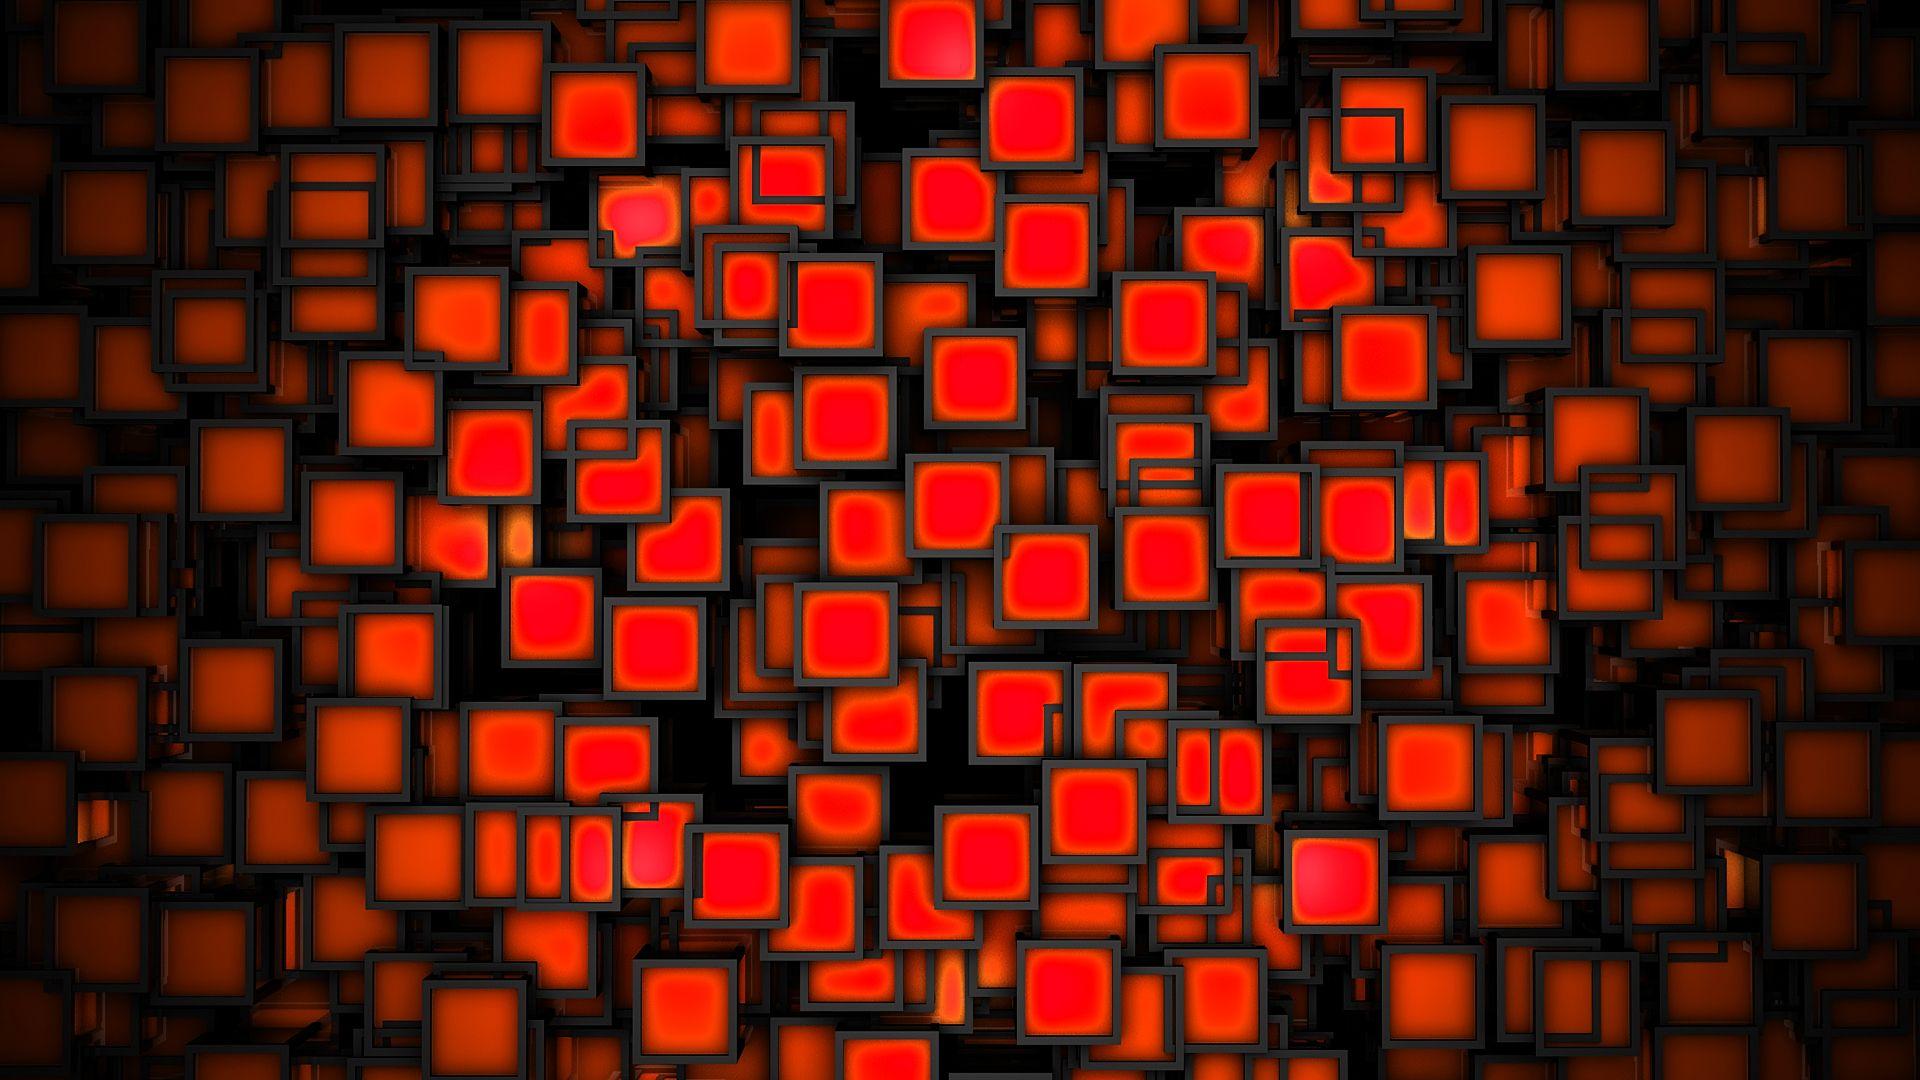 3D & Abstract Neon Squares wallpapers